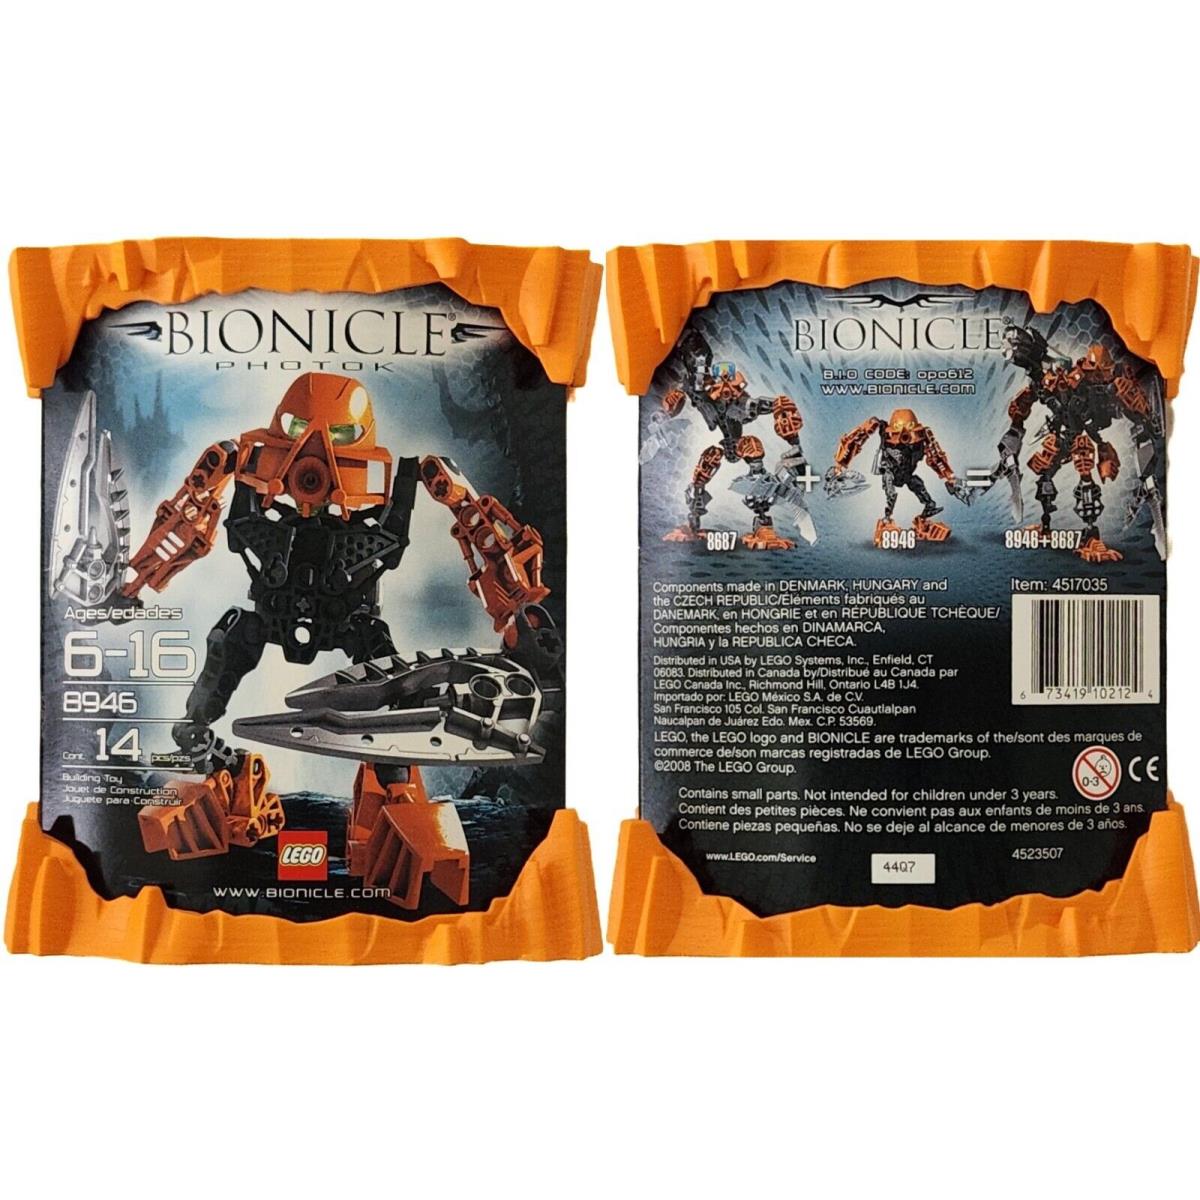 Lego Bionicle Photok 8946 - / Complete Factory Wrap - Retired 2009